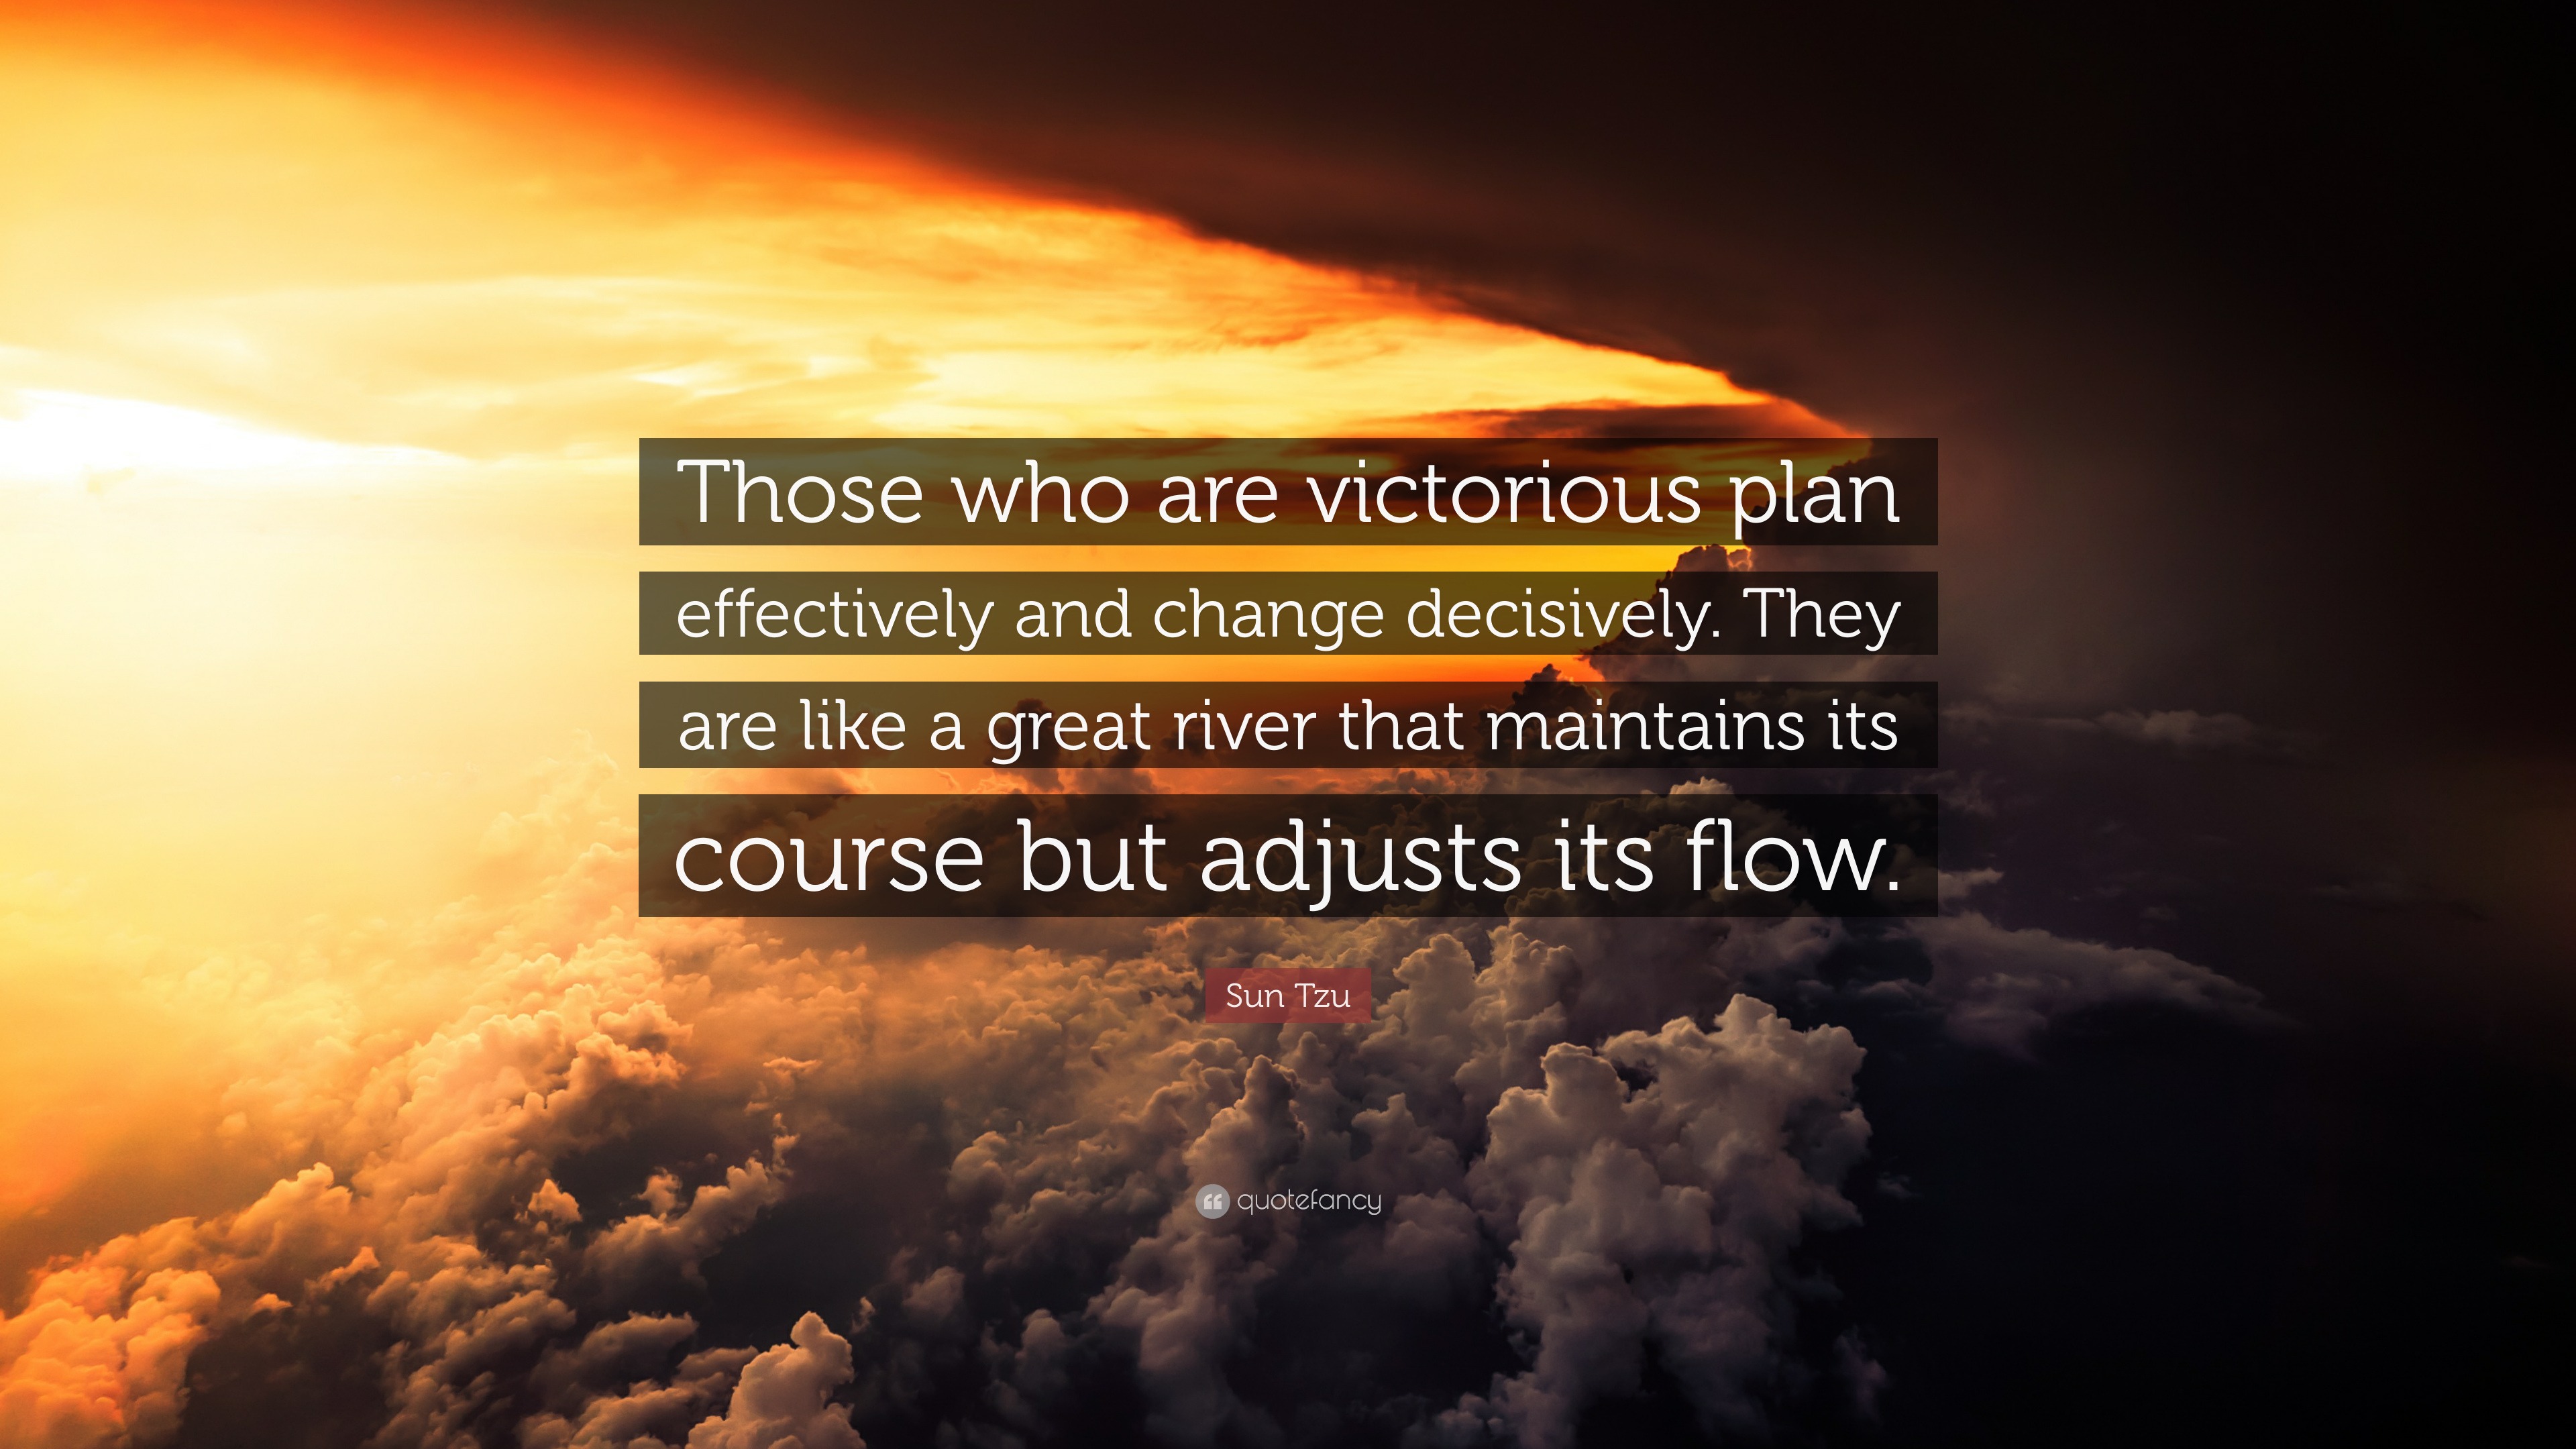 Sun Tzu Quote: “Those who are victorious plan effectively and change